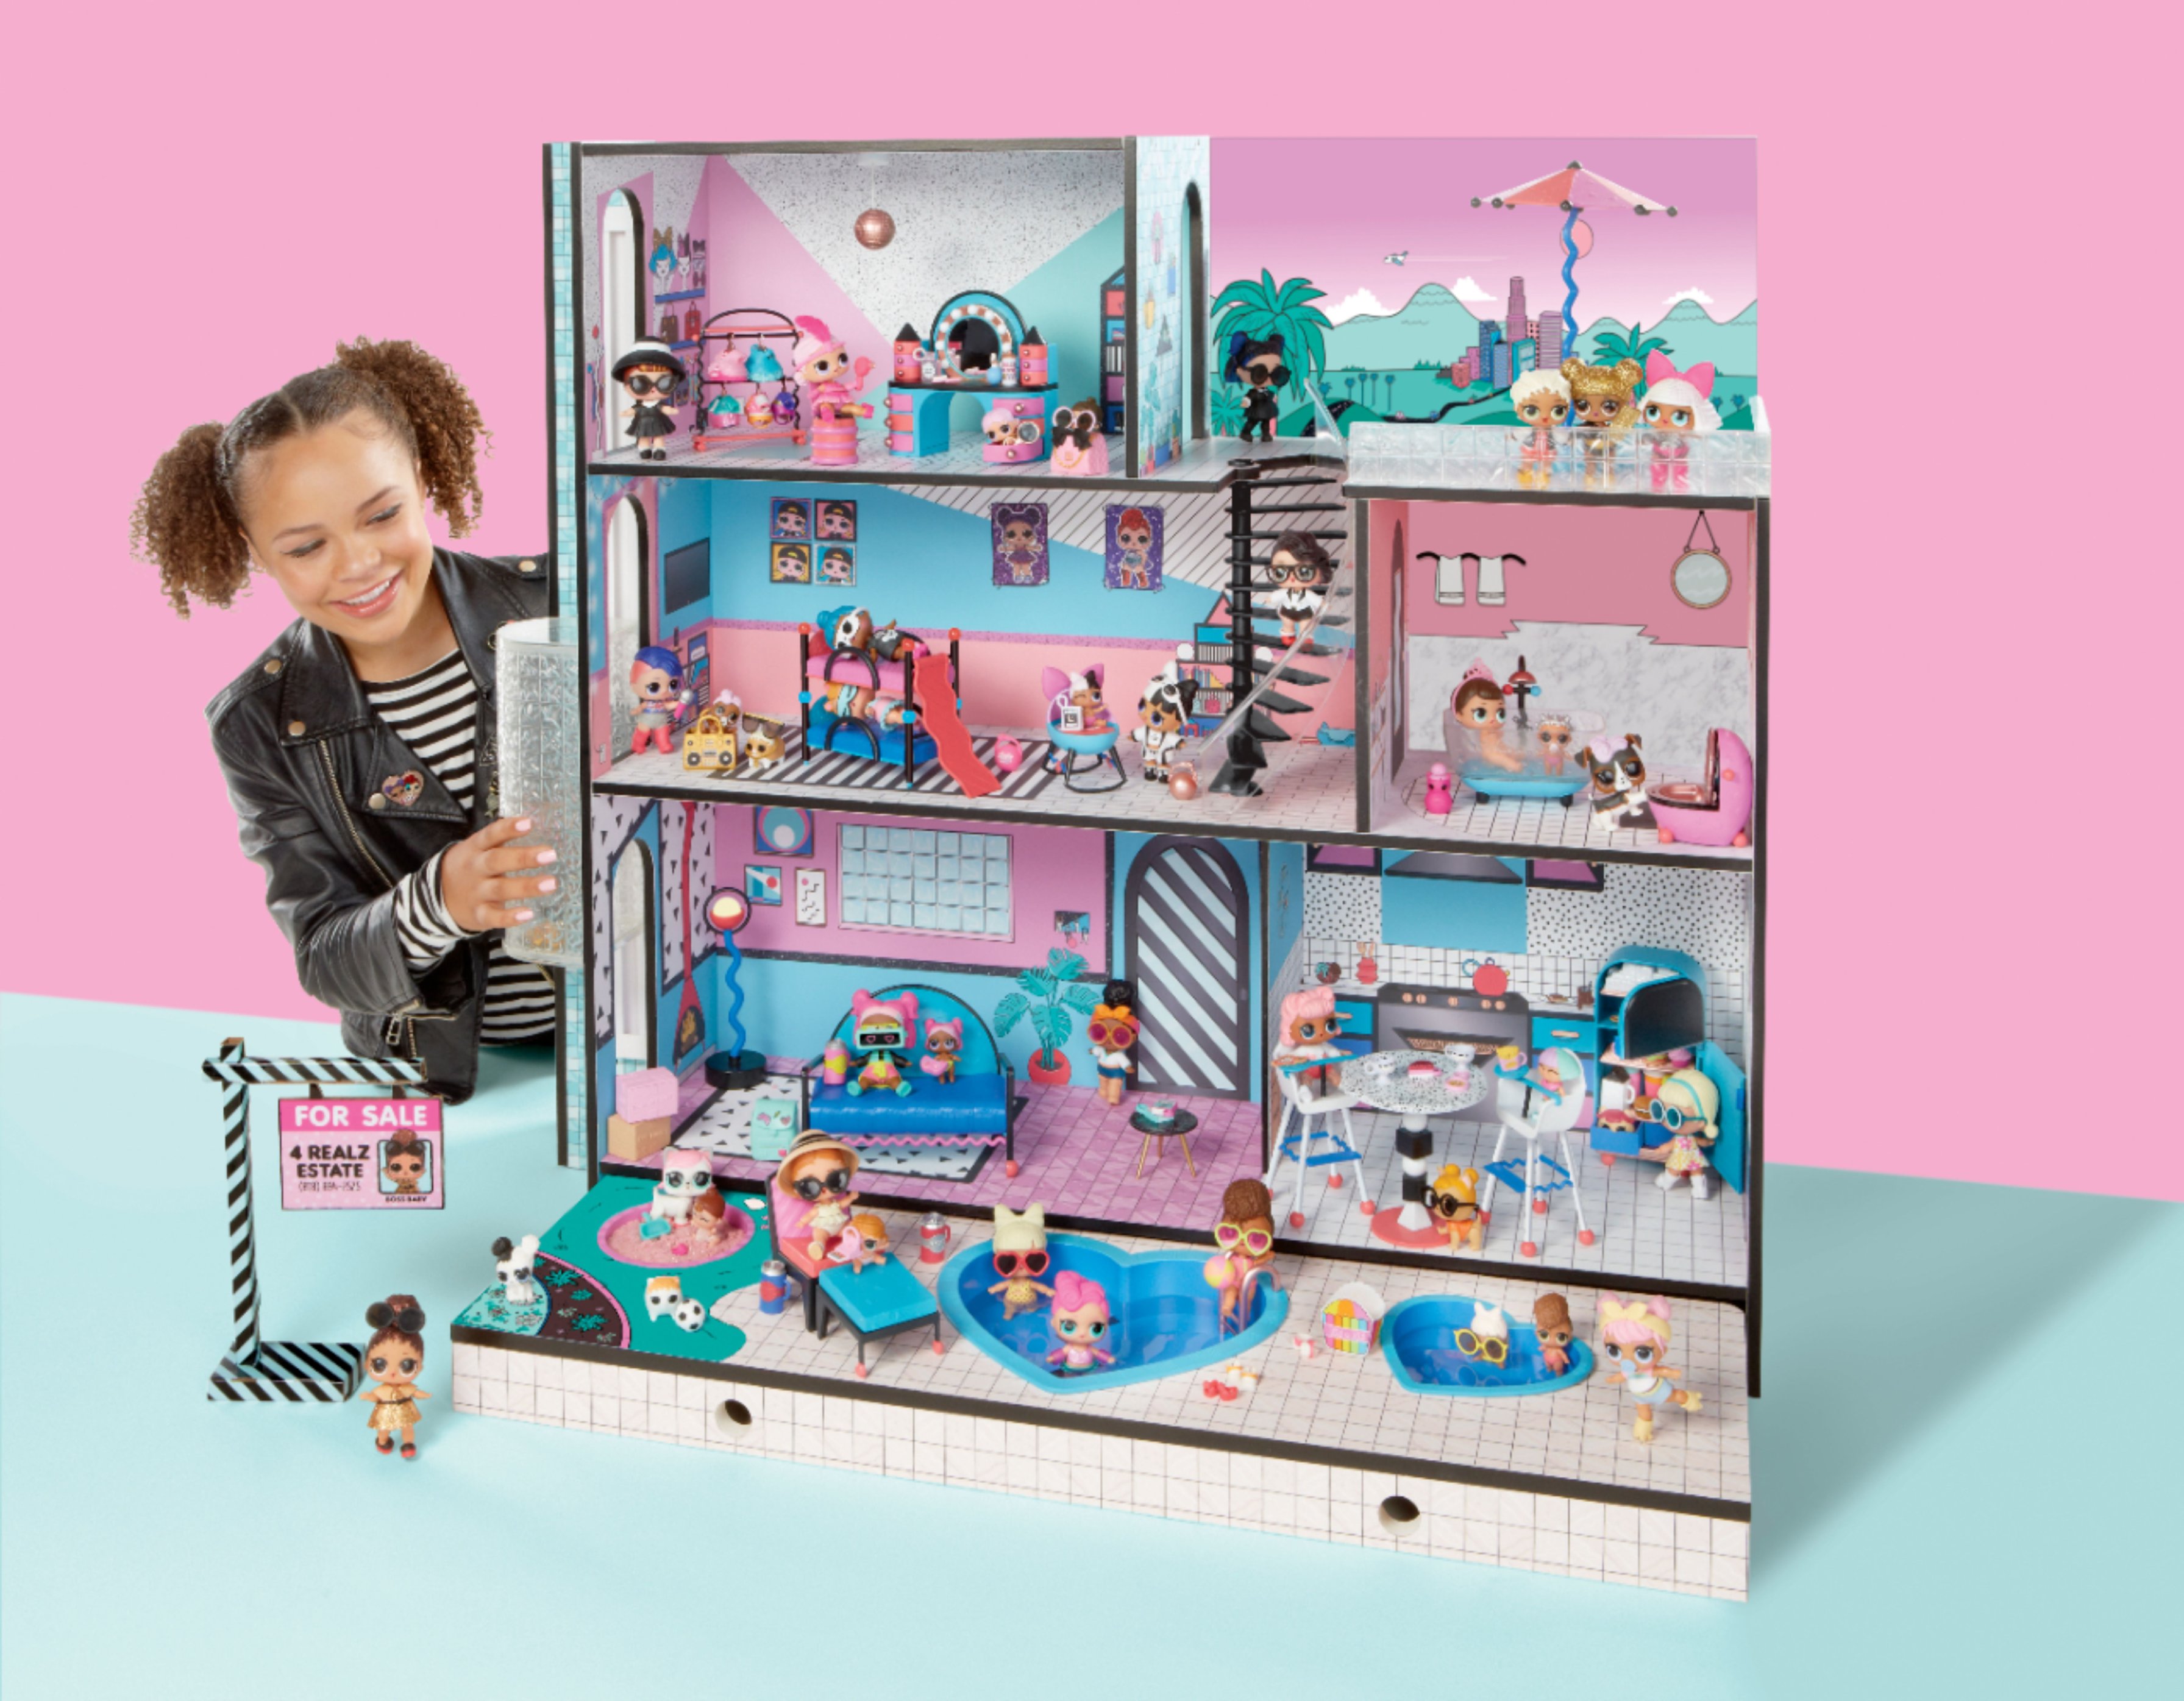 doll houses cyber monday